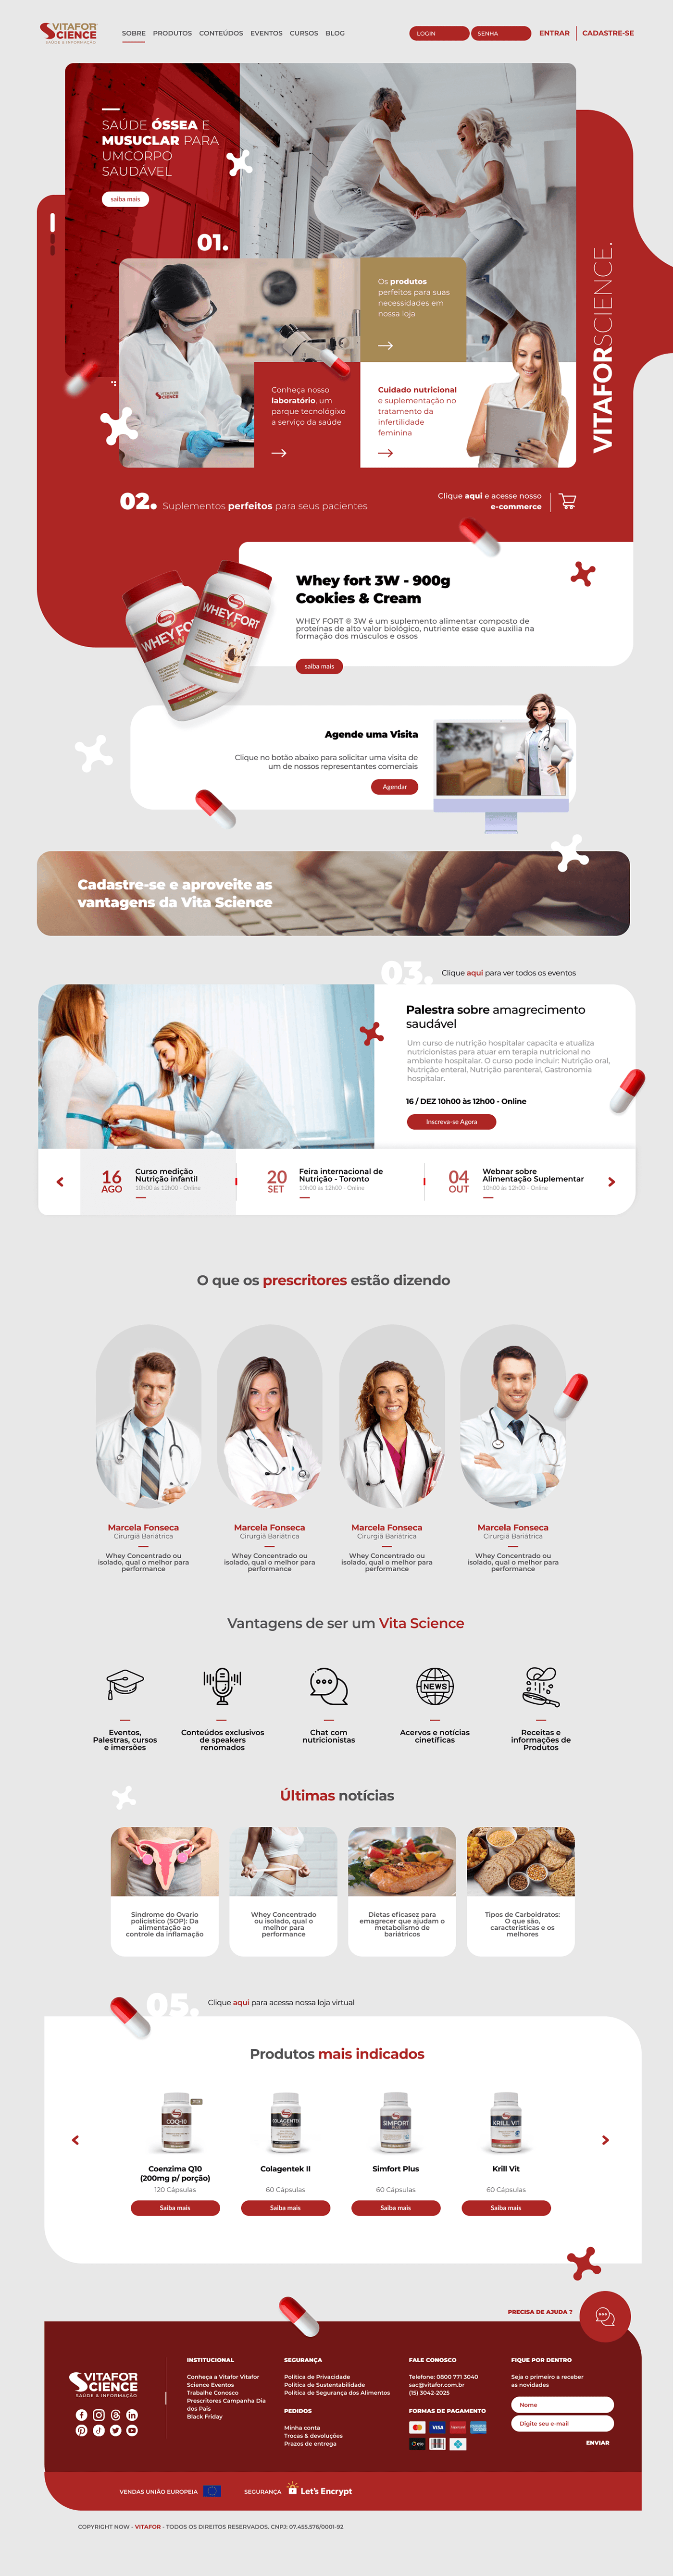 UI/UX user interface Experience Interface Web Design  user experience Website design